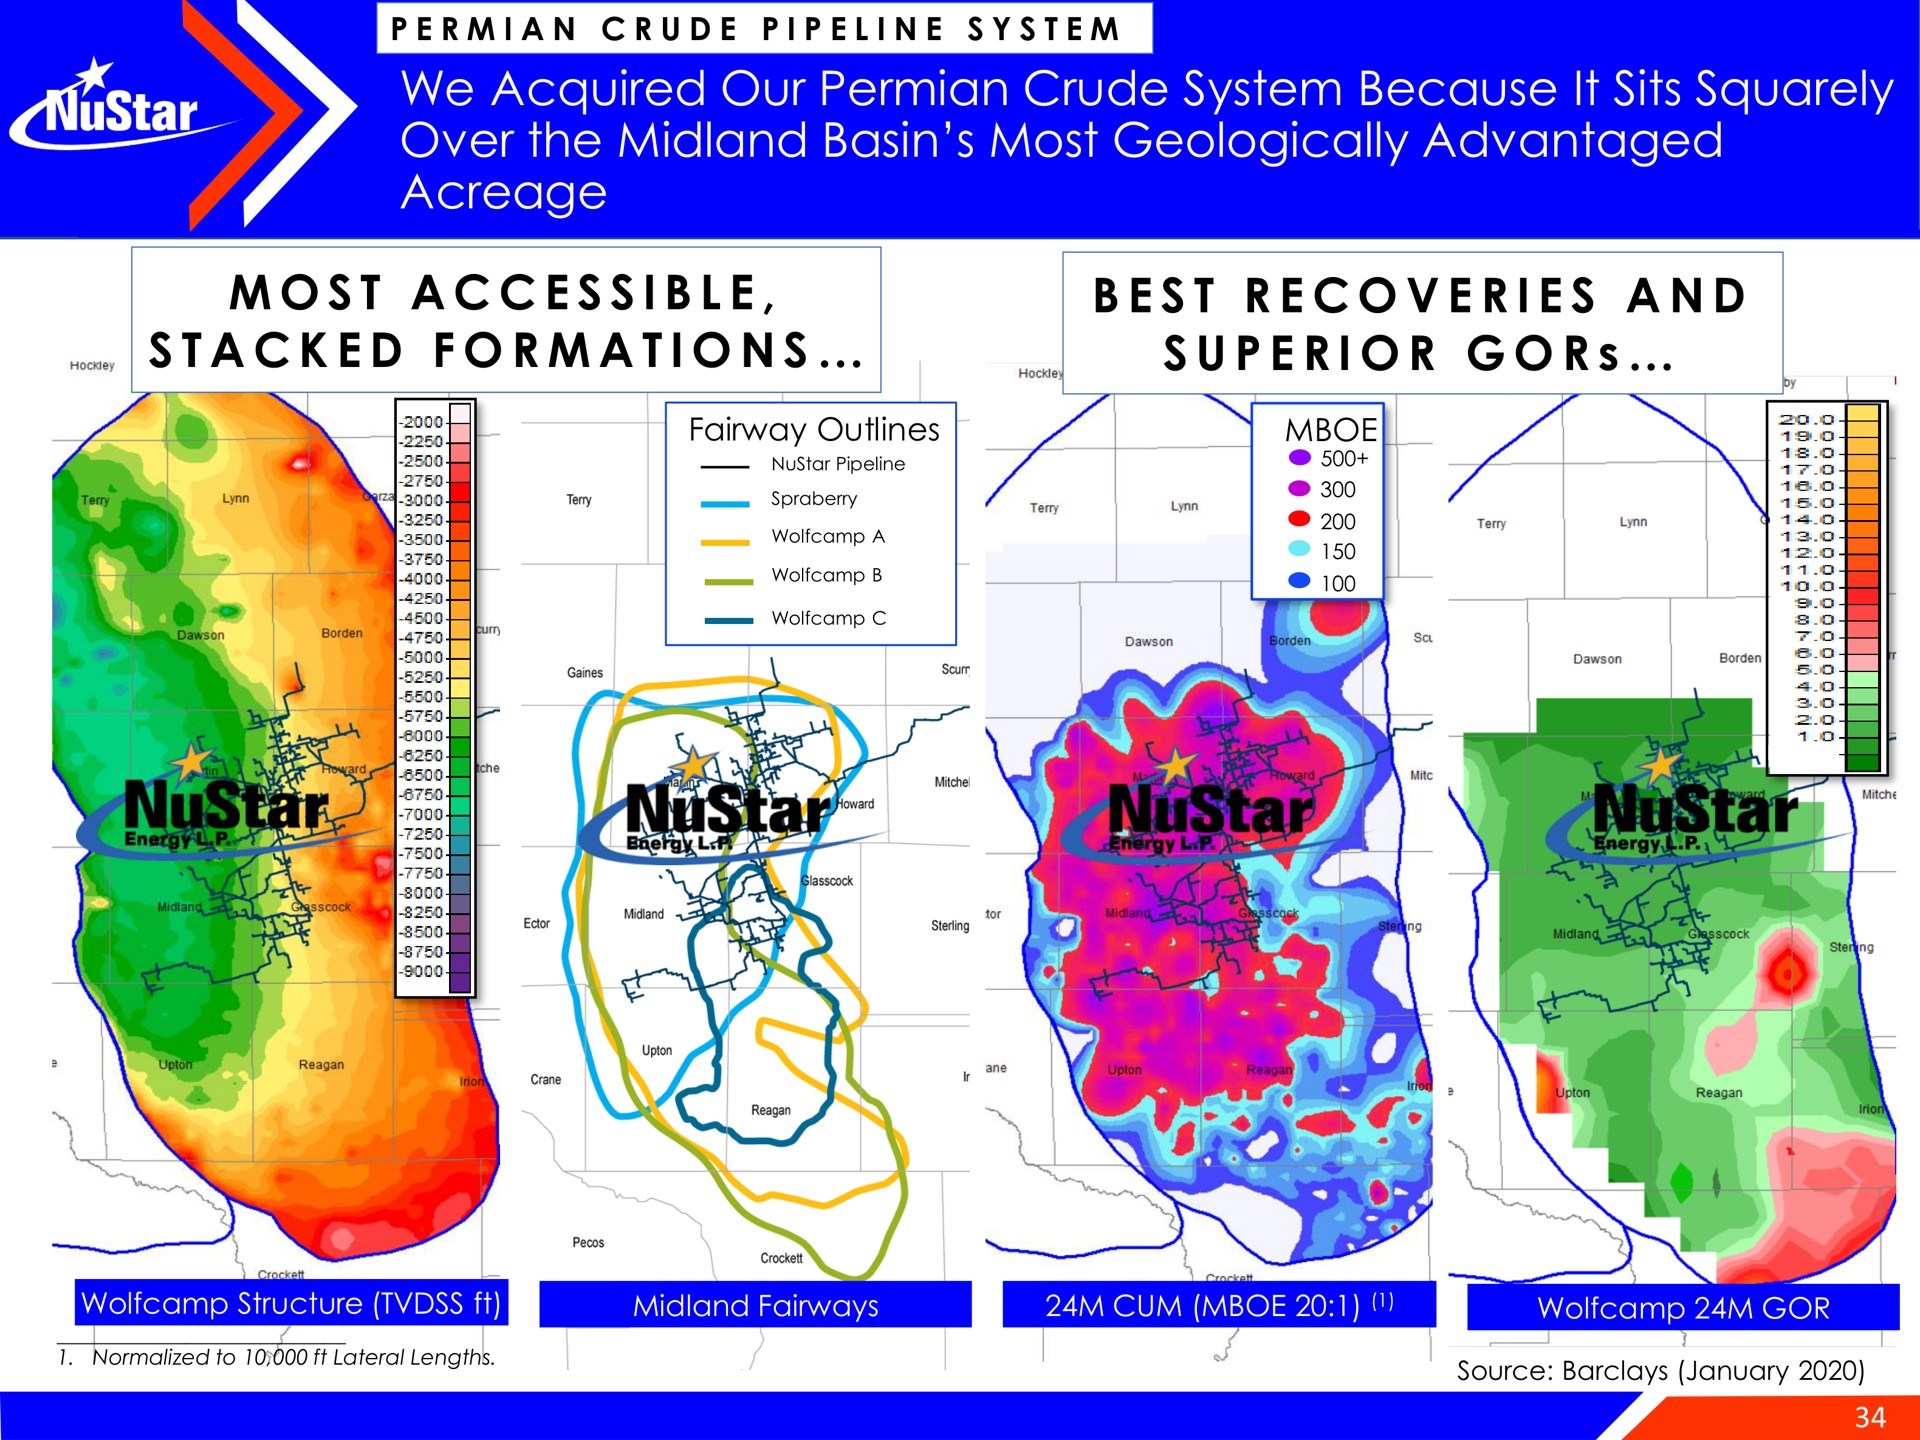 we acquired our crude system because it sits squarely over the midland basin most geologically advantaged acreage a i a a i i a i tor | NuStar Energy